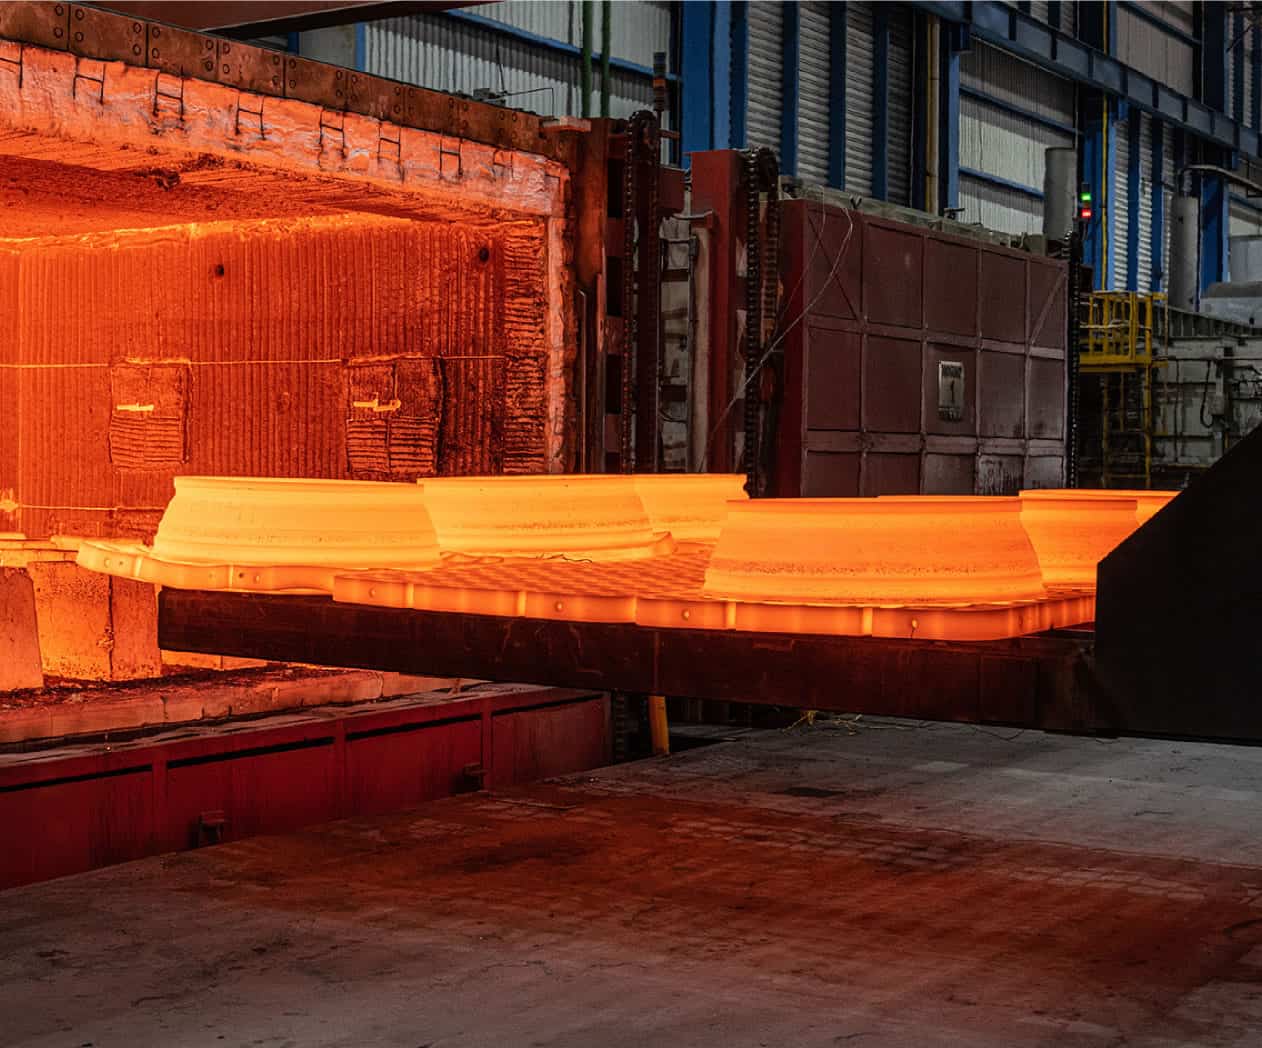 A large furnace is being used to make a piece of metal.